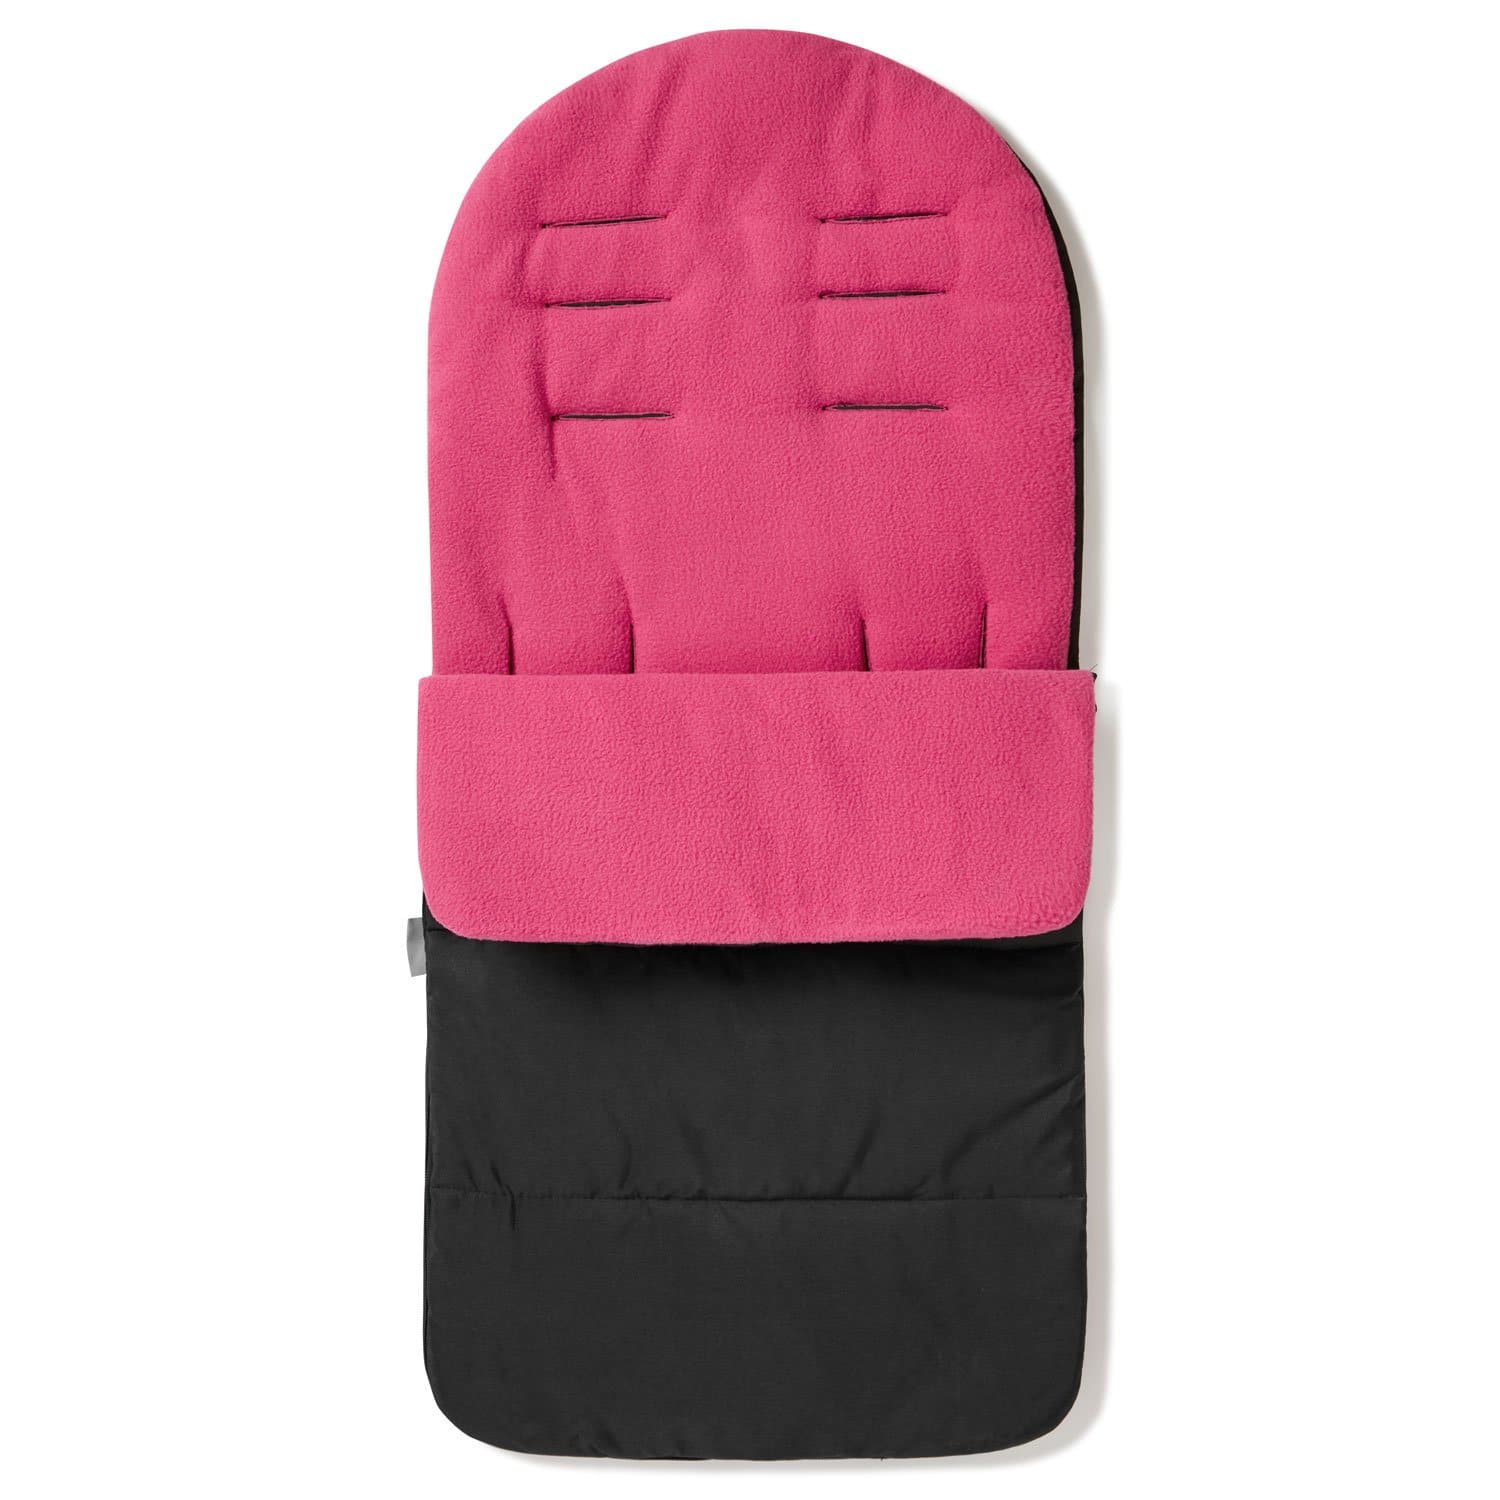 Premium Footmuff / Cosy Toes Compatible with Nuna - Pink Rose / Fits All Models | For Your Little One